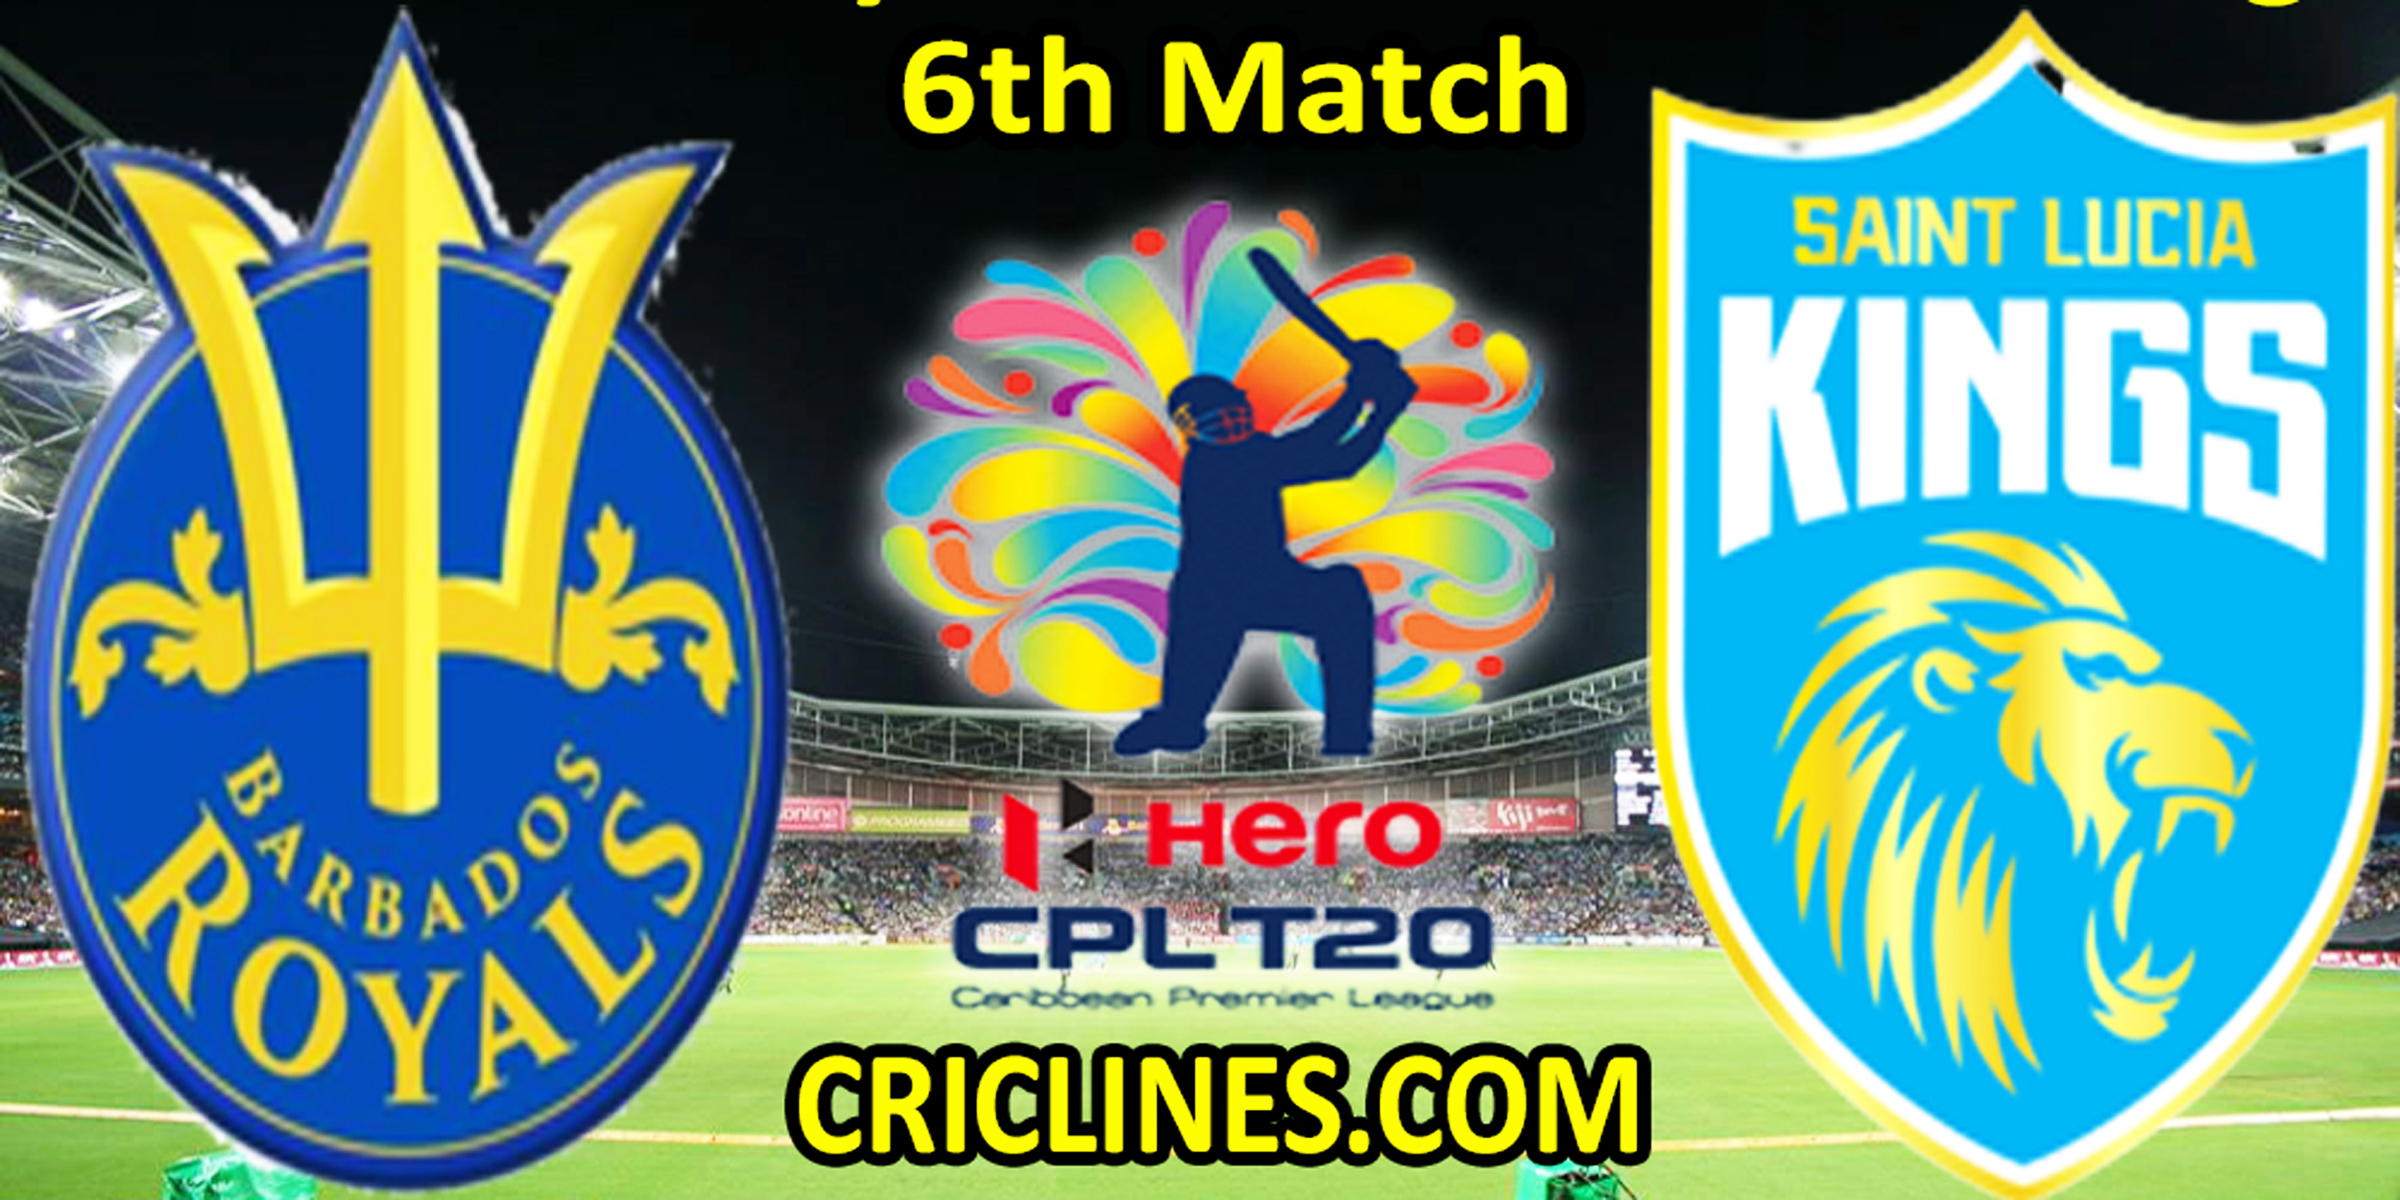 Today Match Prediction-BRS vs SLK-CPL T20 2022-6th Match-Who Will Win